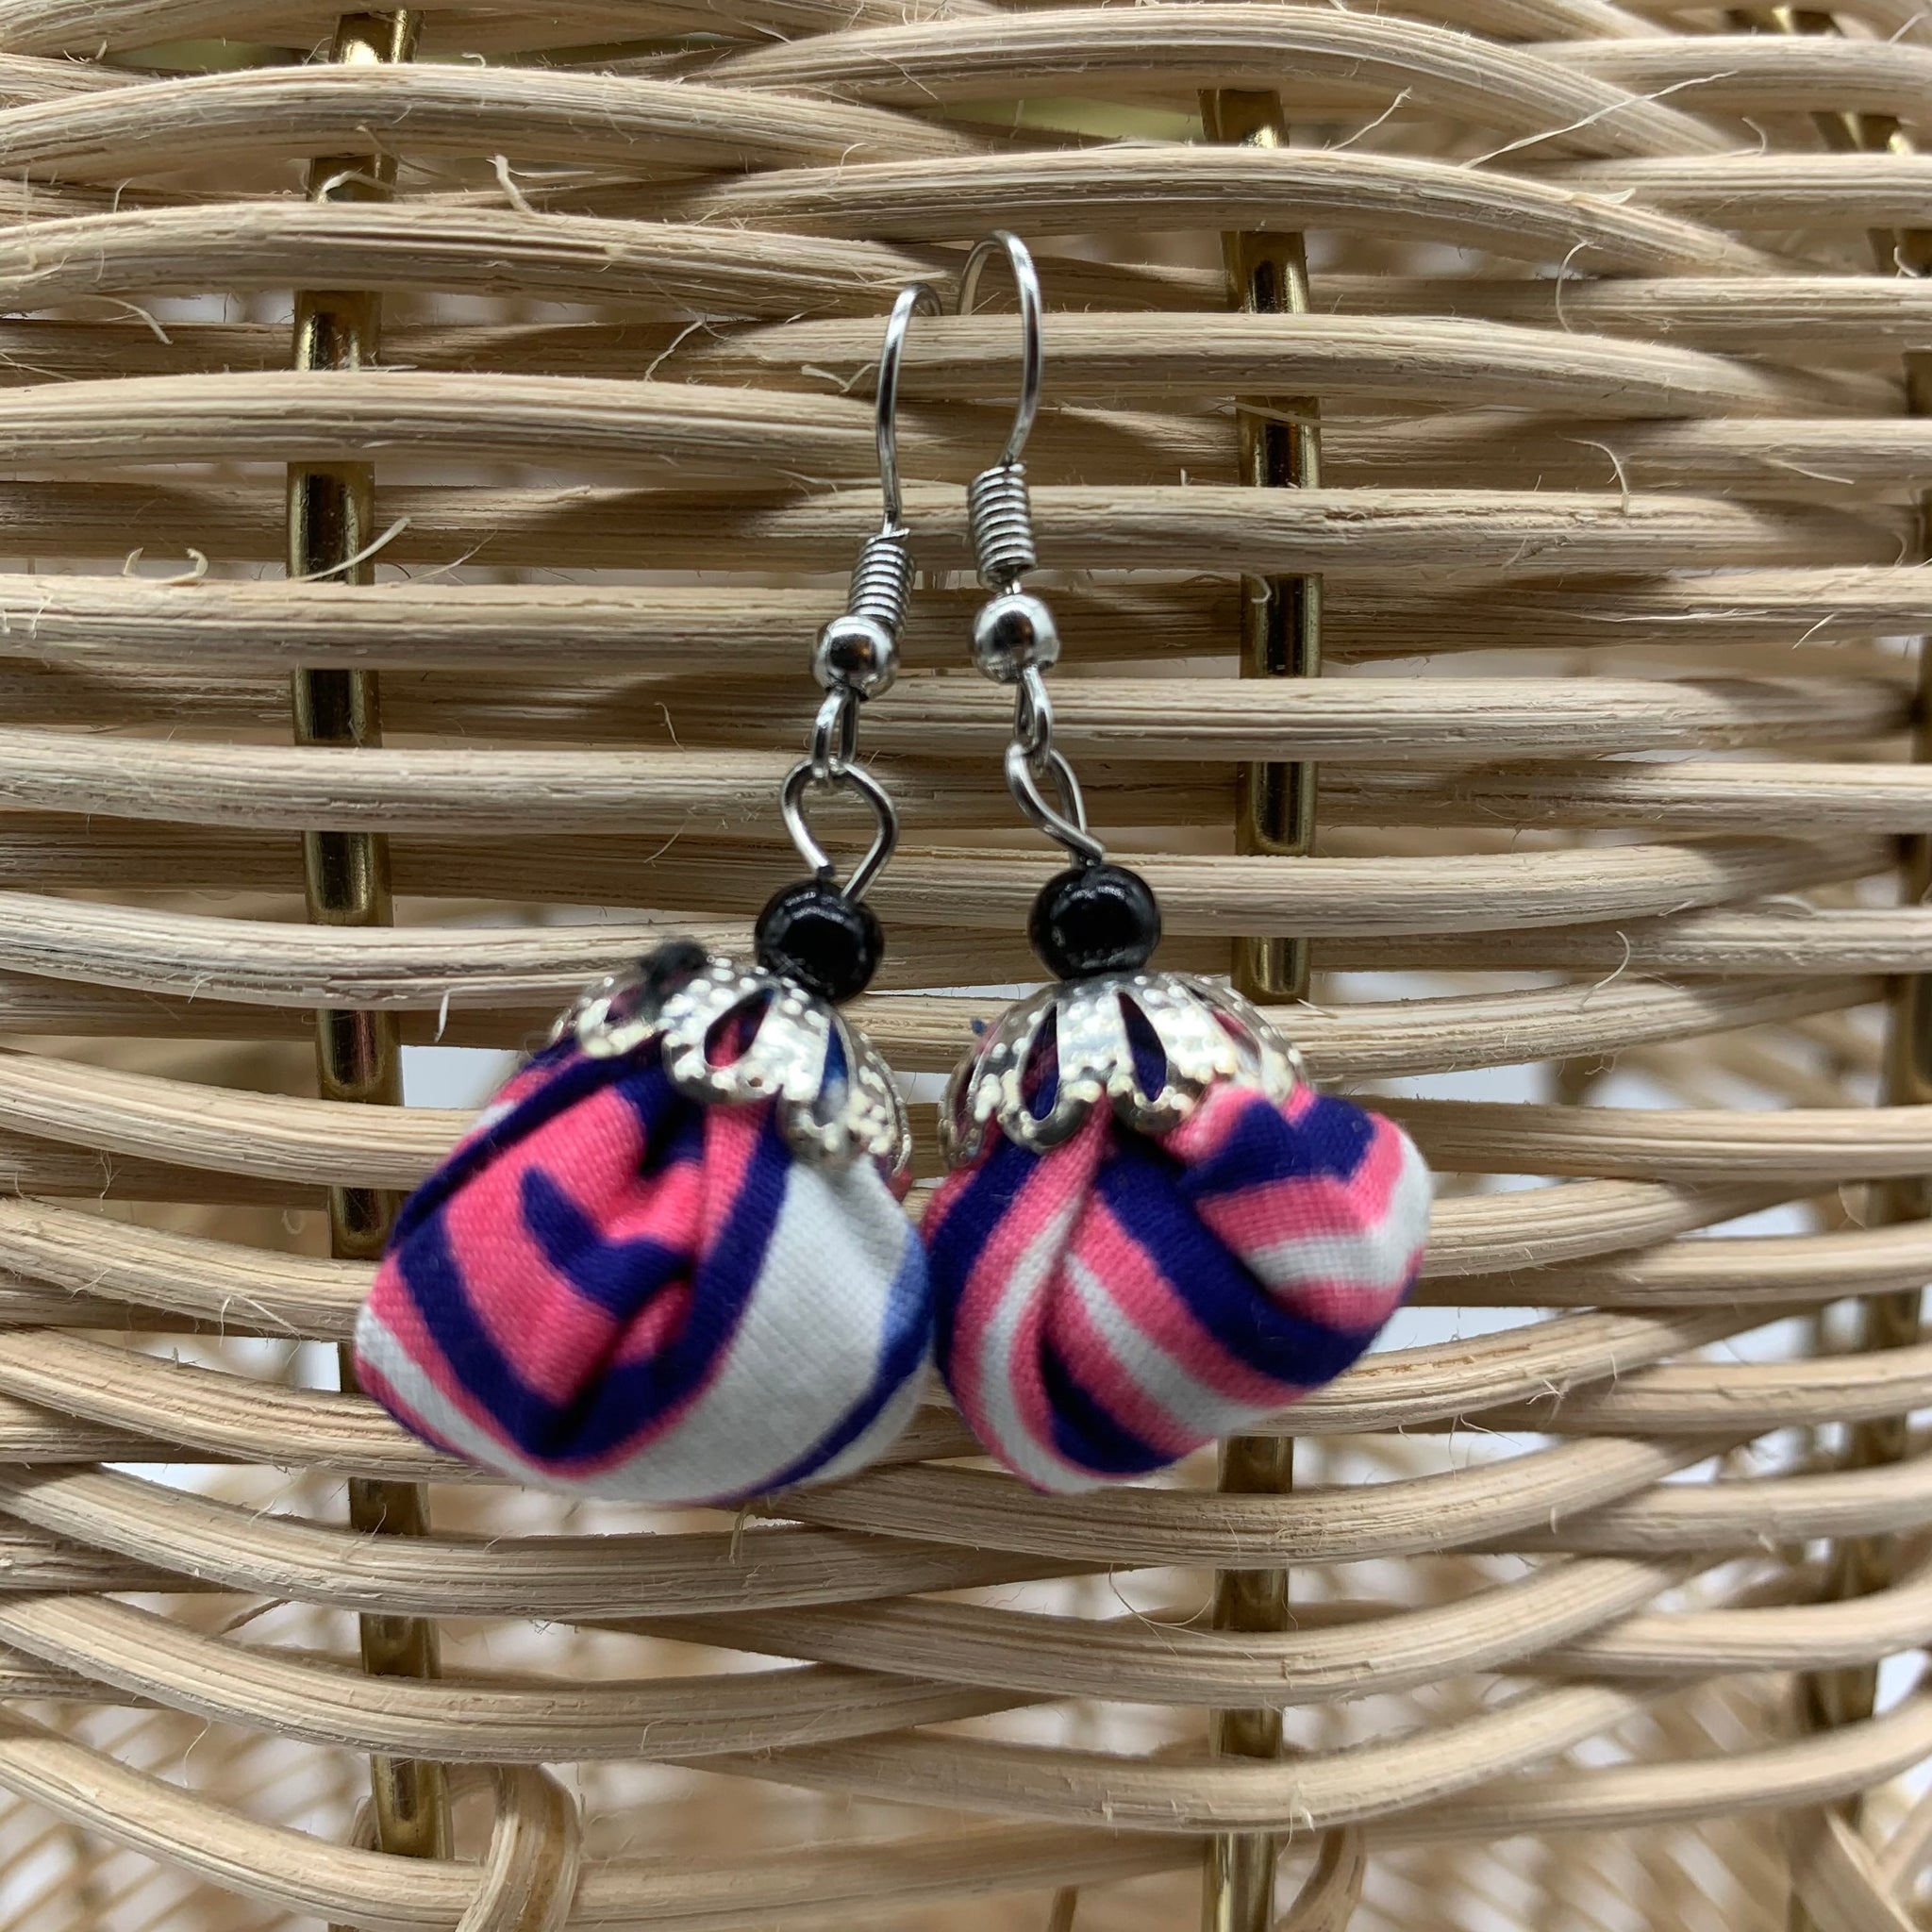 African Print Earrings W/ Beads-Puff Ball Pink Variation 3